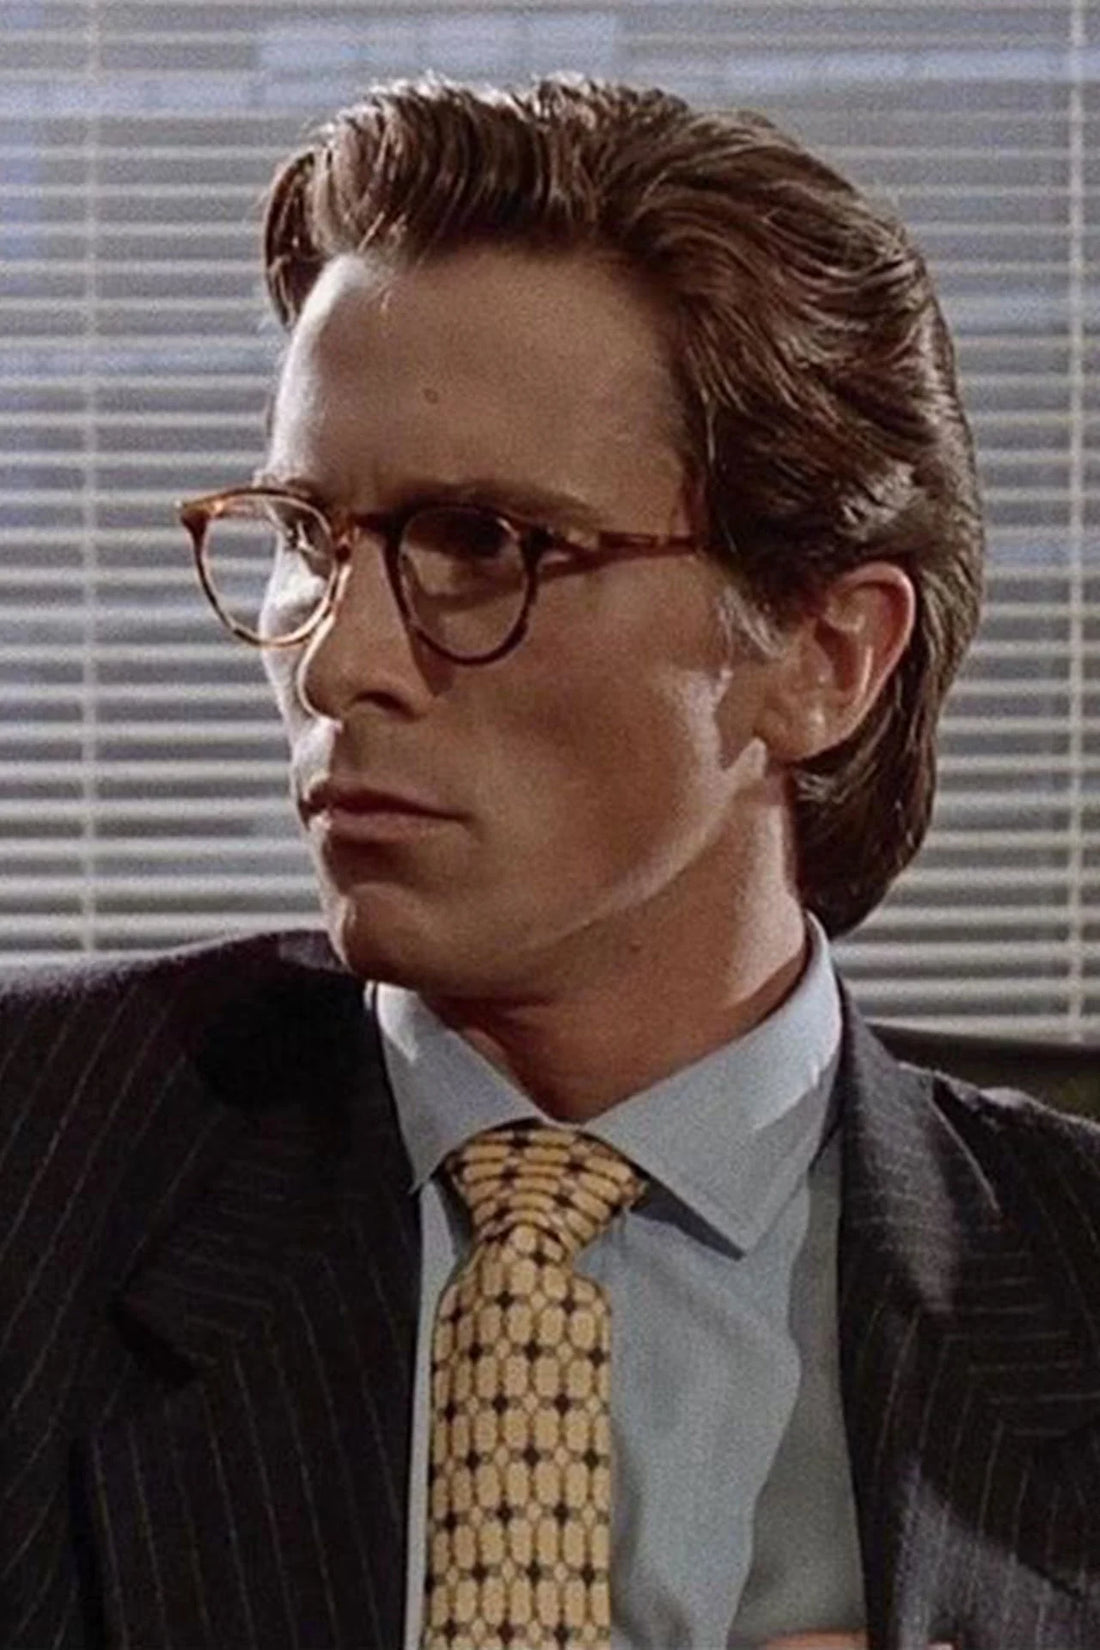 Patrick Bateman with Glasses from American Psycho